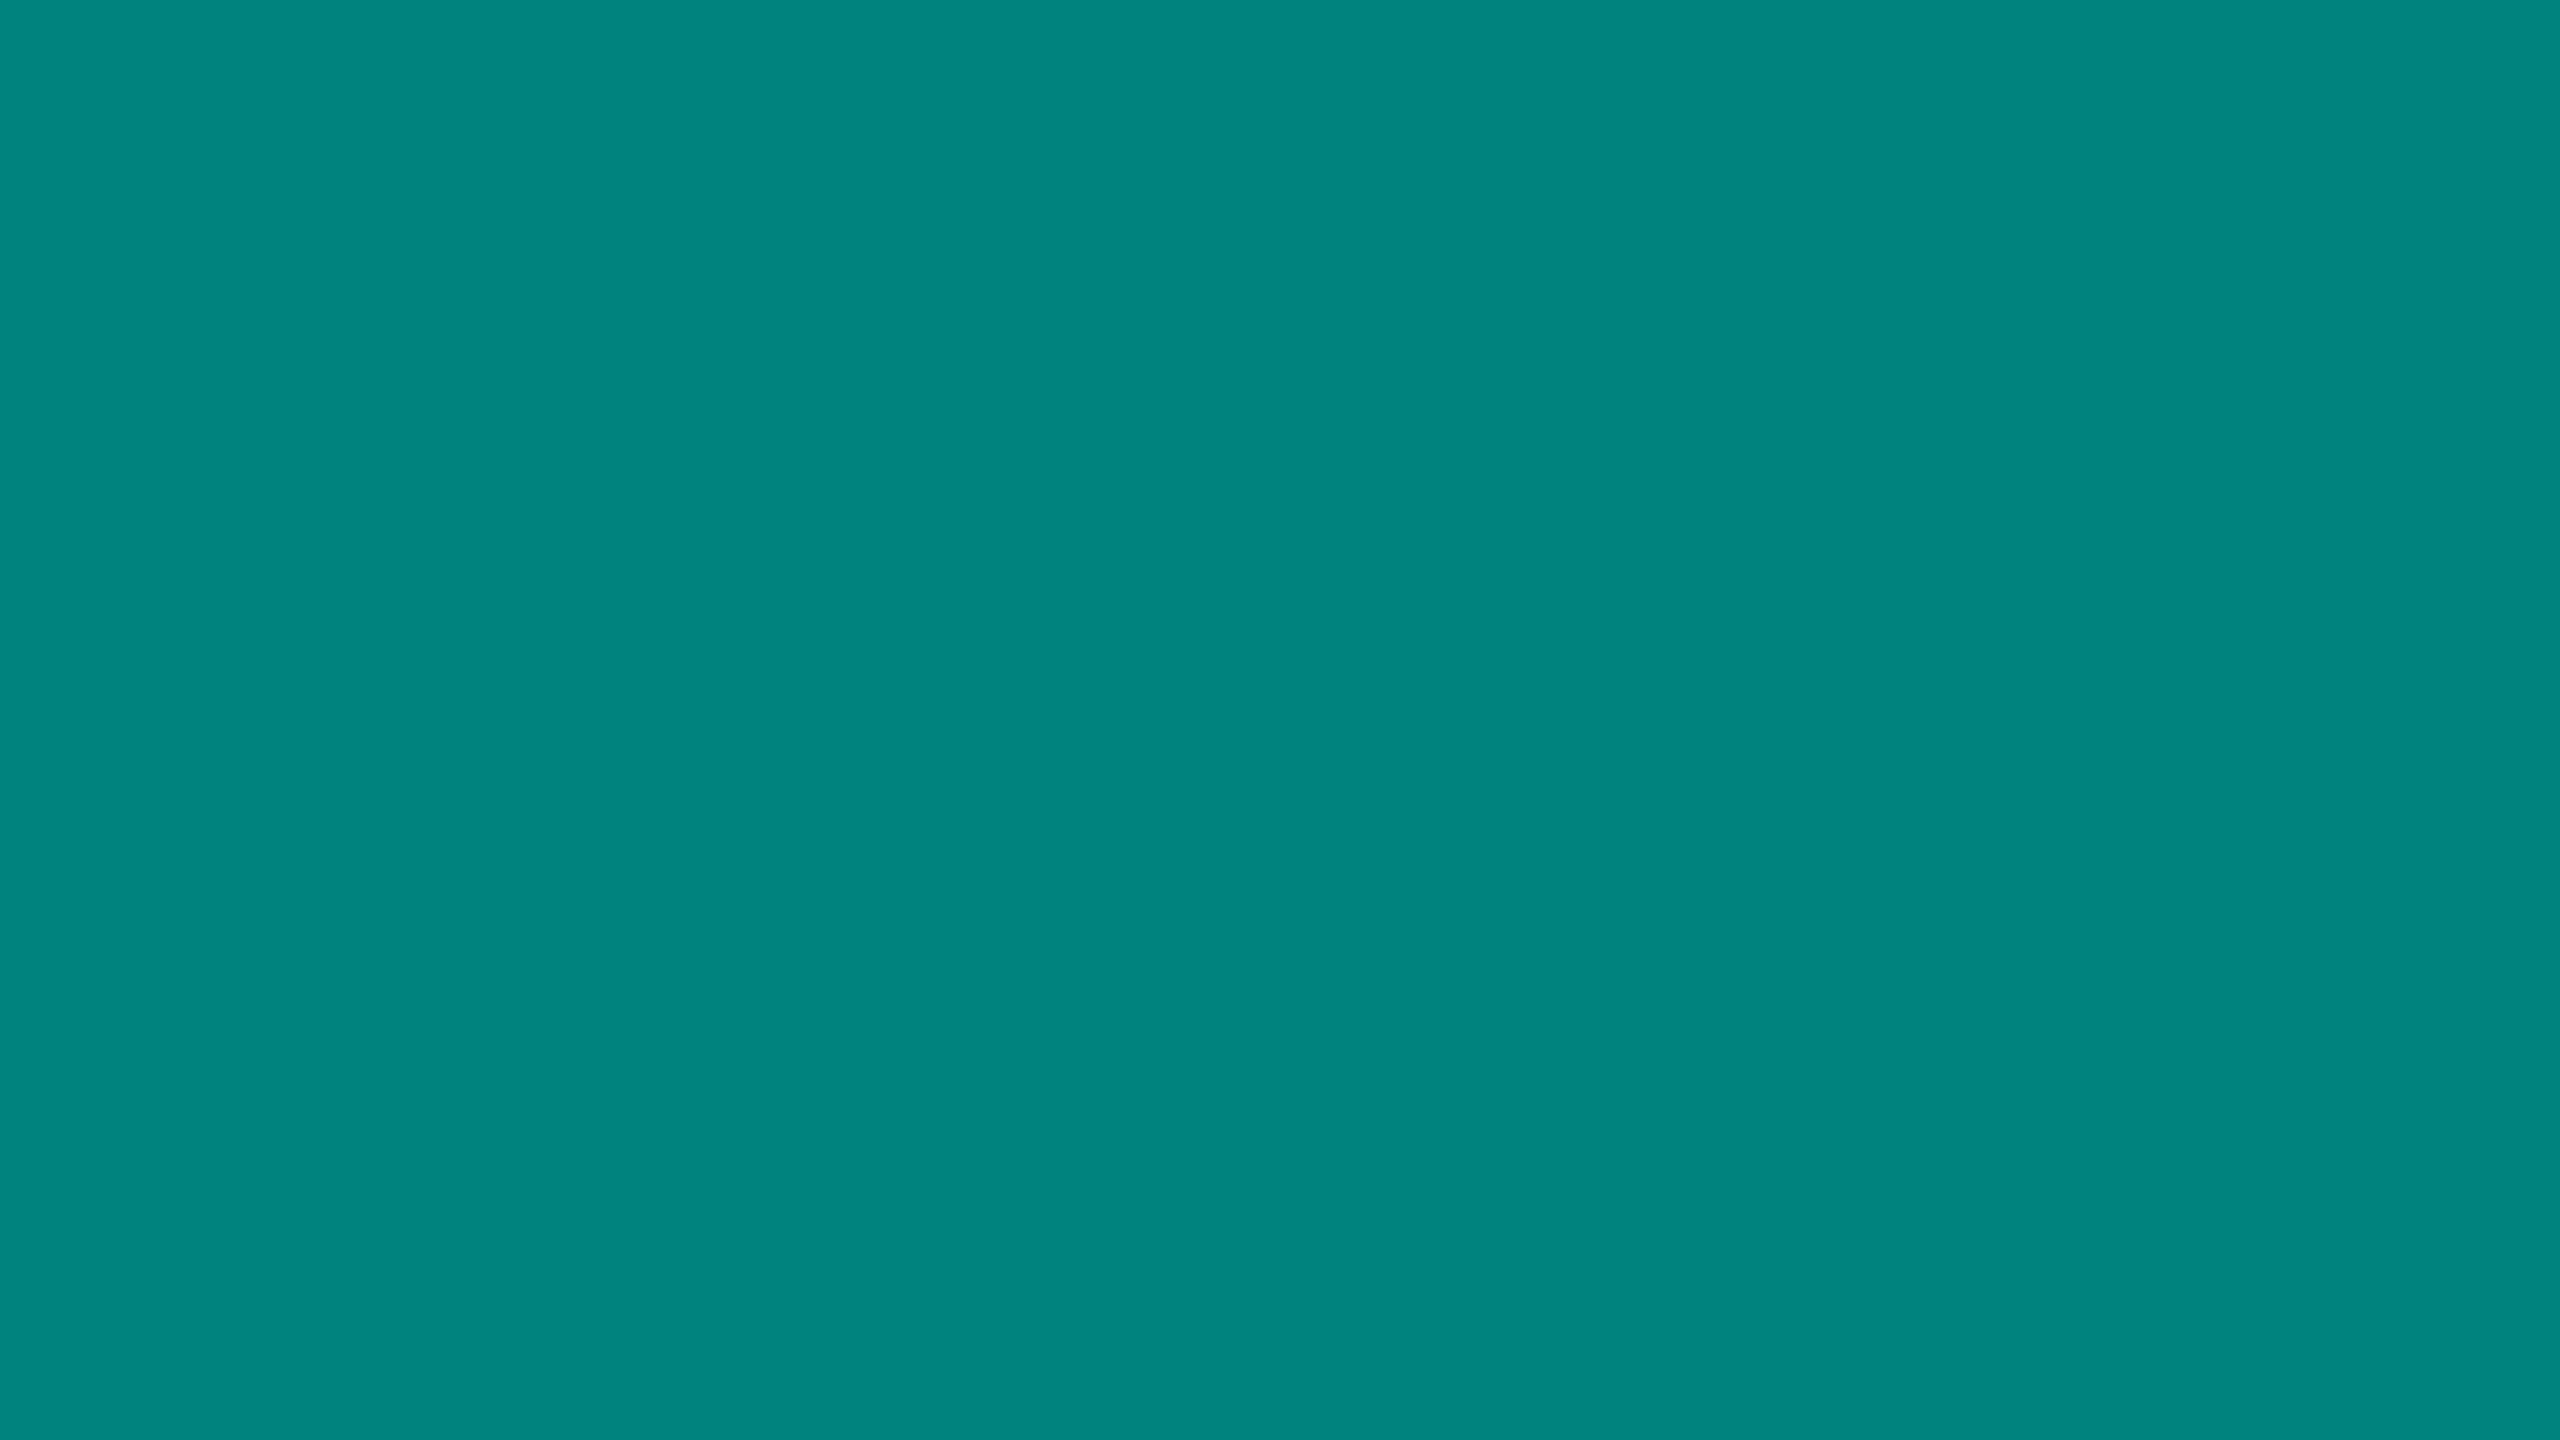 Solid Teal Background Green